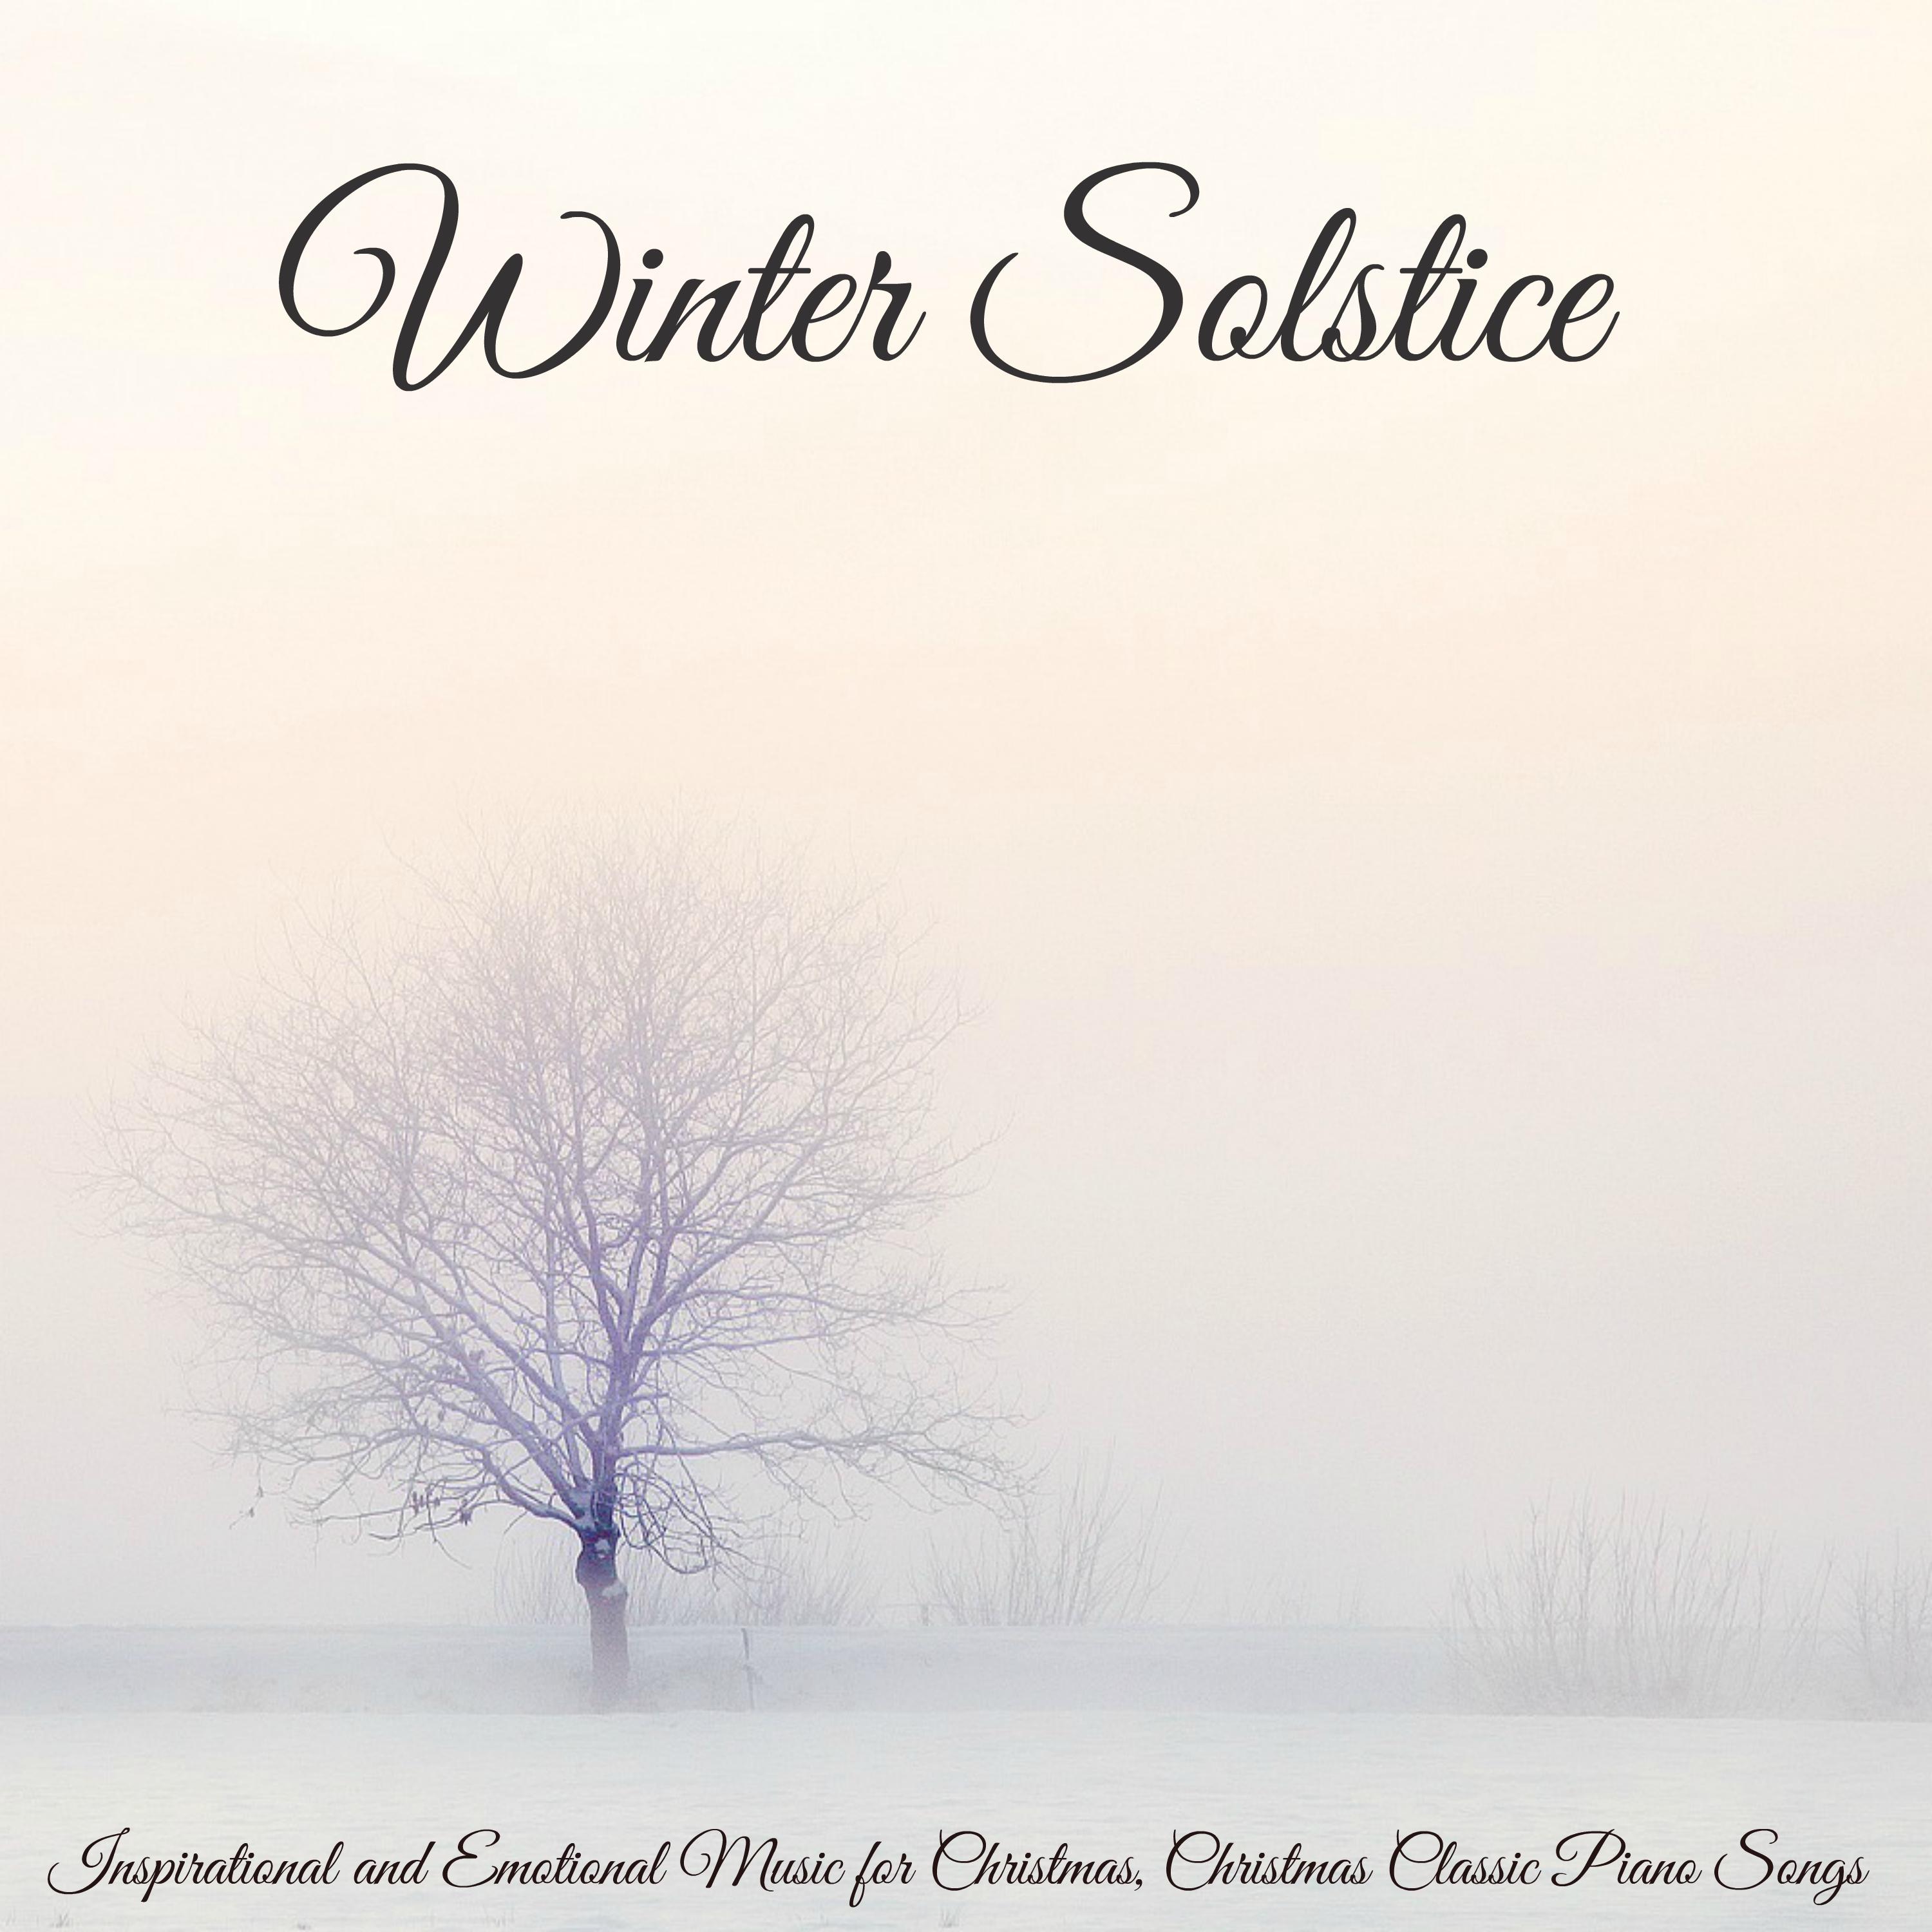 Winter Solstice  Inspirational and Emotional Music for Christmas, Christmas Classic Piano Songs